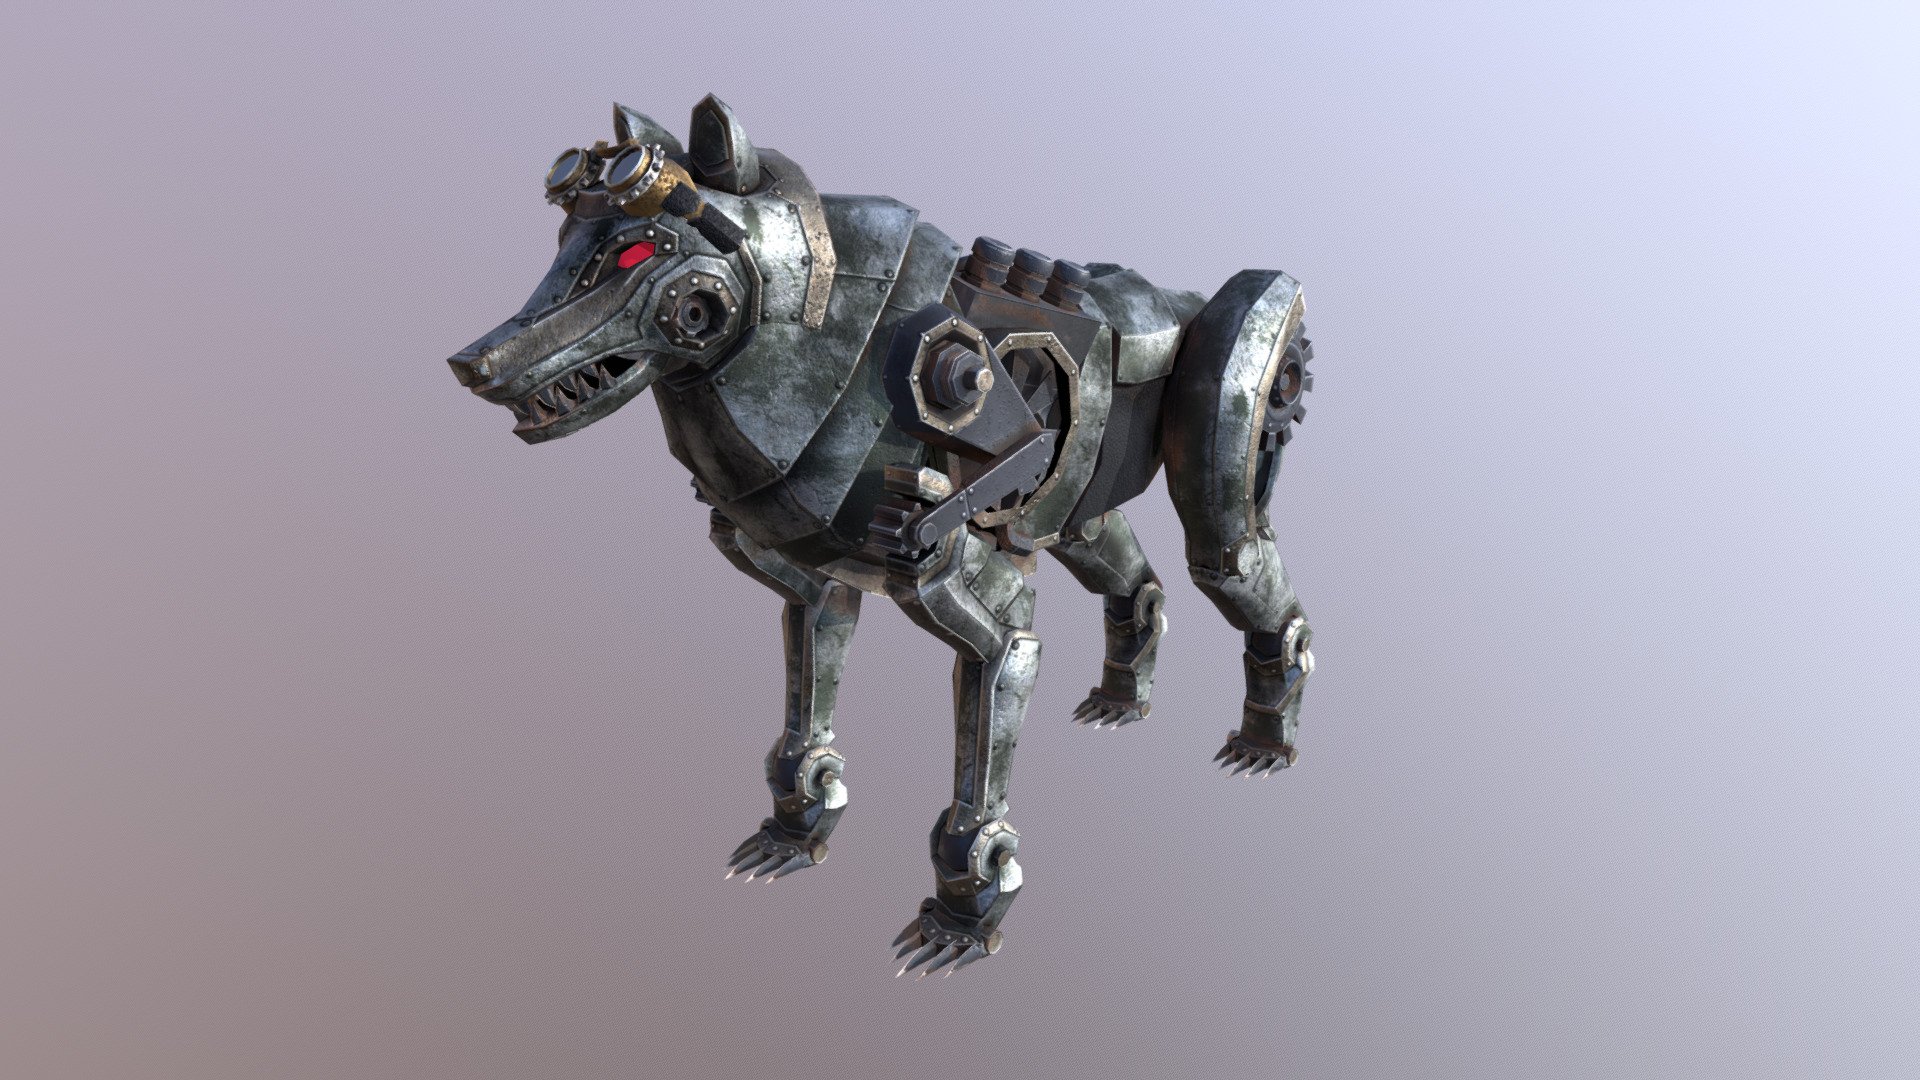 Steampunk Wolf for the game “Darco - Reign of Elements” 

Now on Steam of
TP Studios

Model &amp; Texture by me - Steampunk Wolf Model - 3D model by Anakaii 3d model